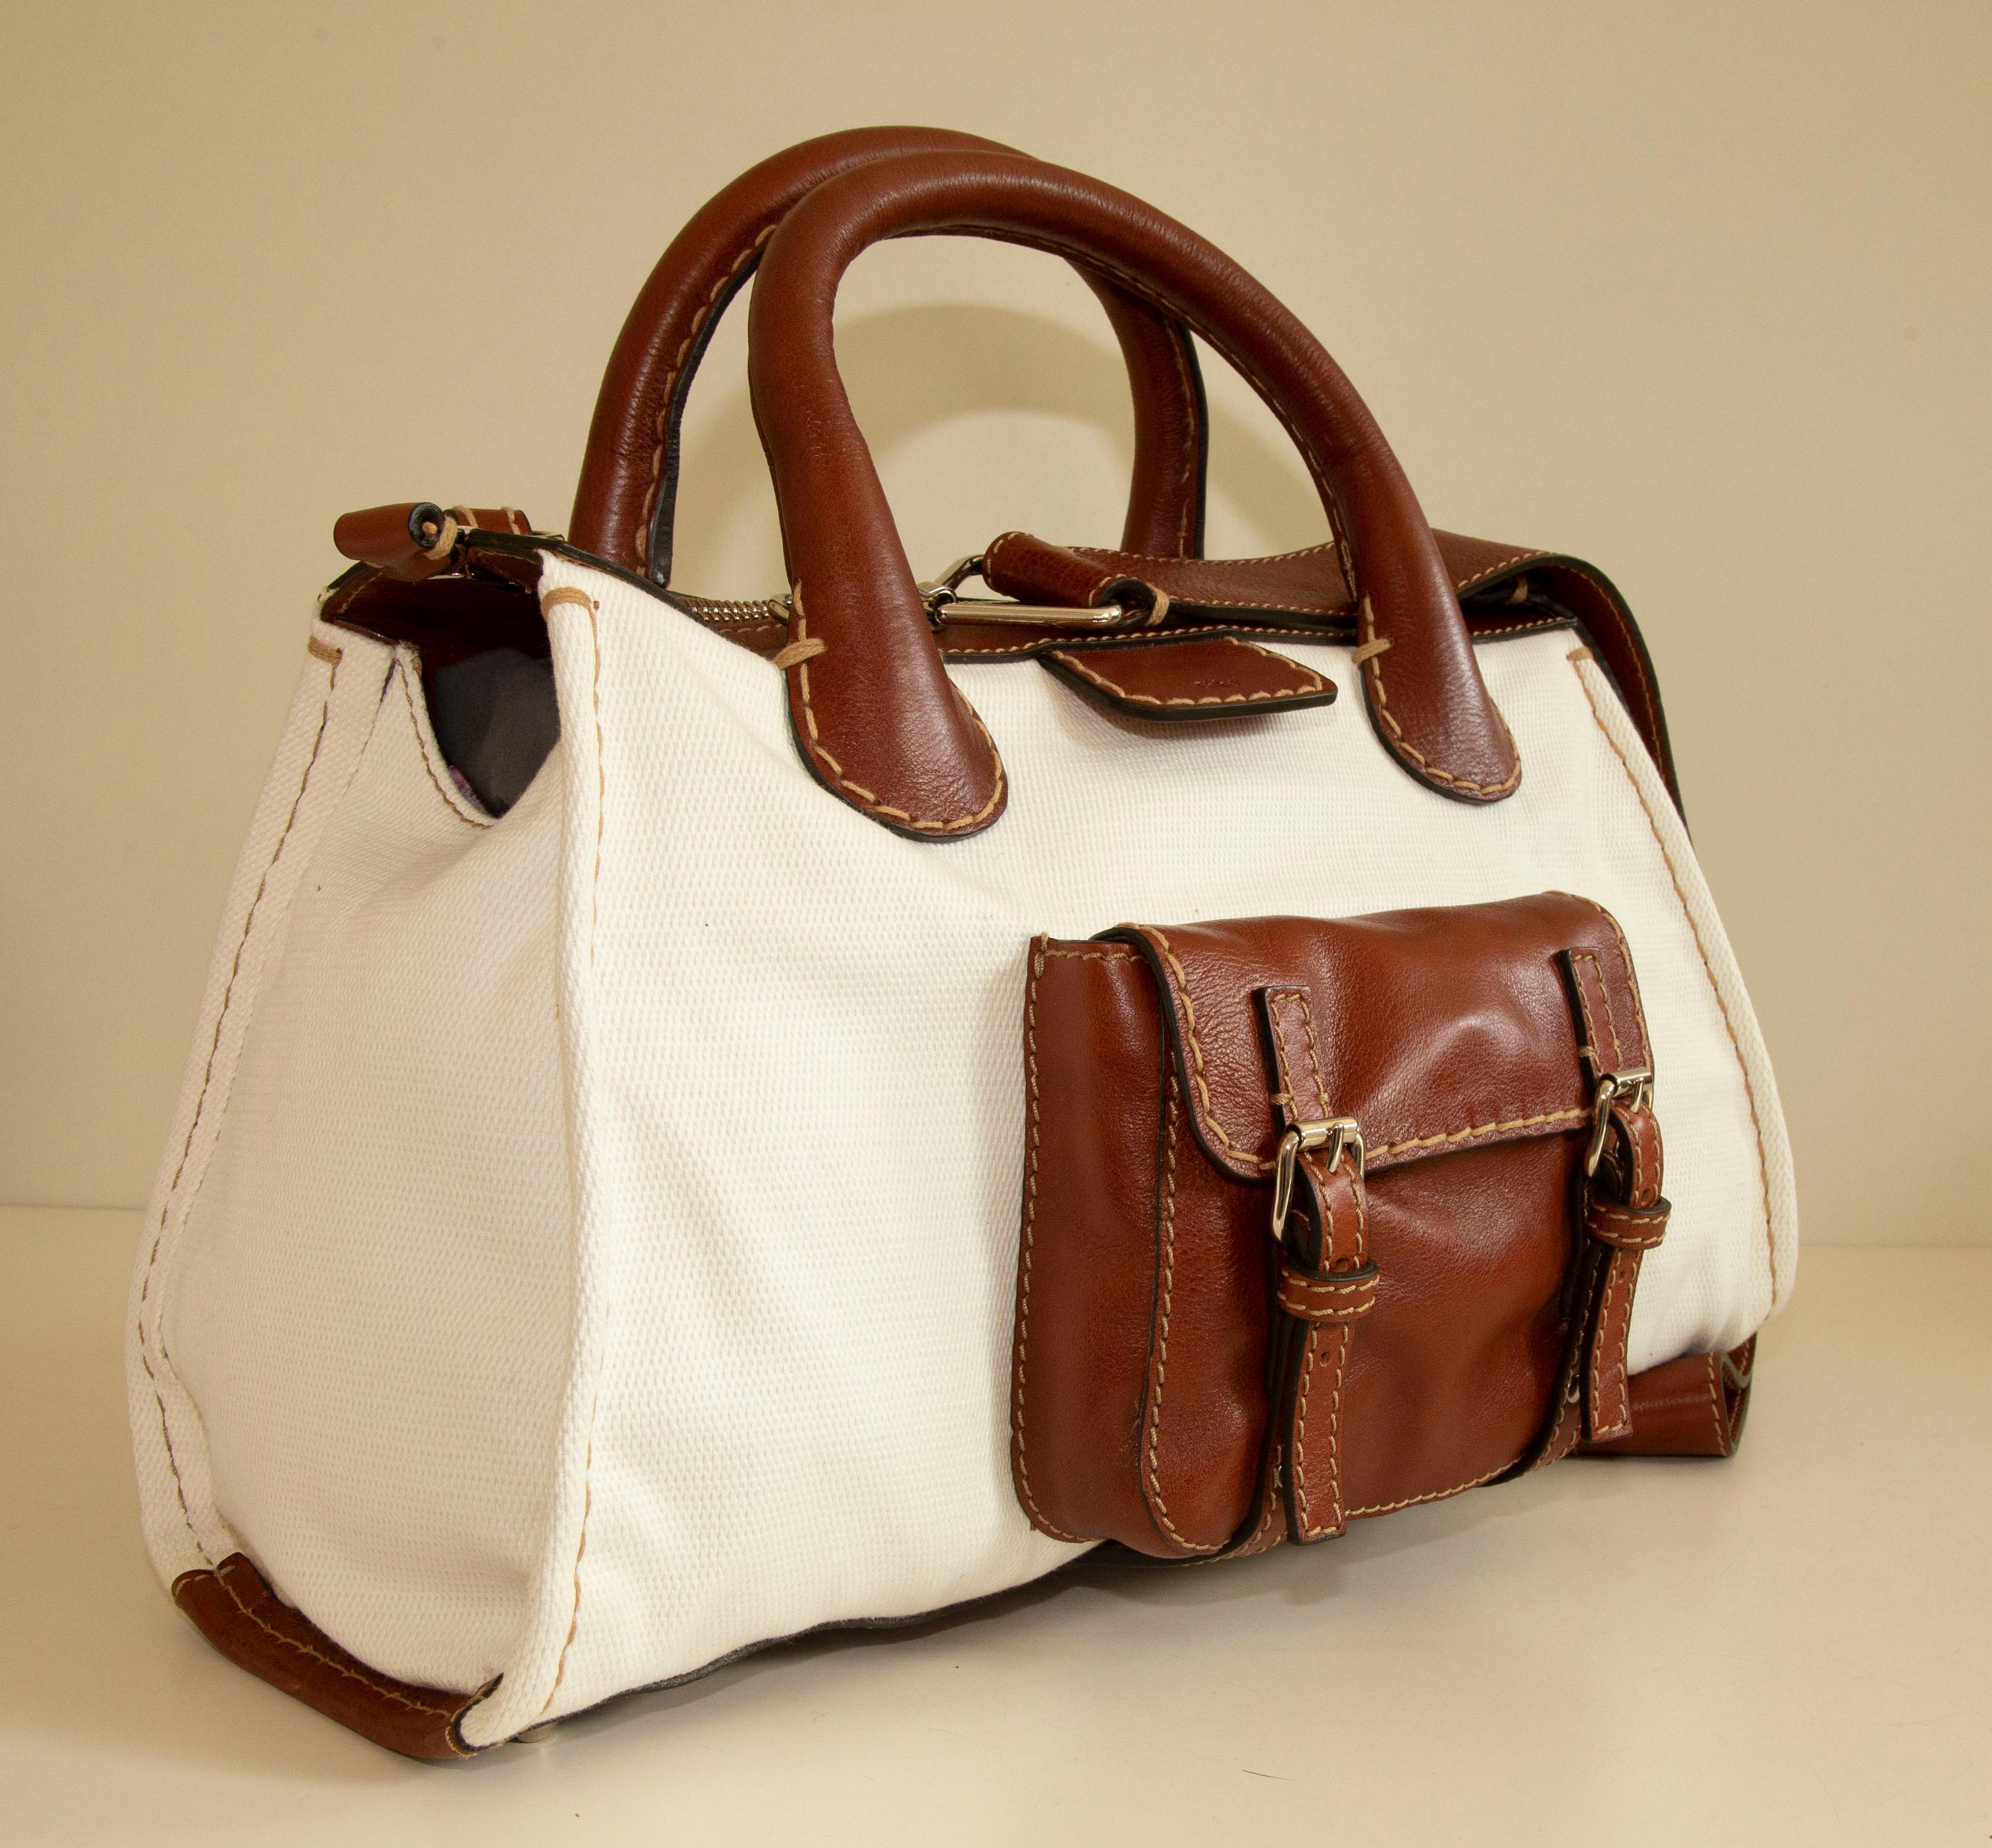 Chloe Edith Medium Tote in White Canvas and Brown Leather In Good Condition For Sale In Arnhem, NL